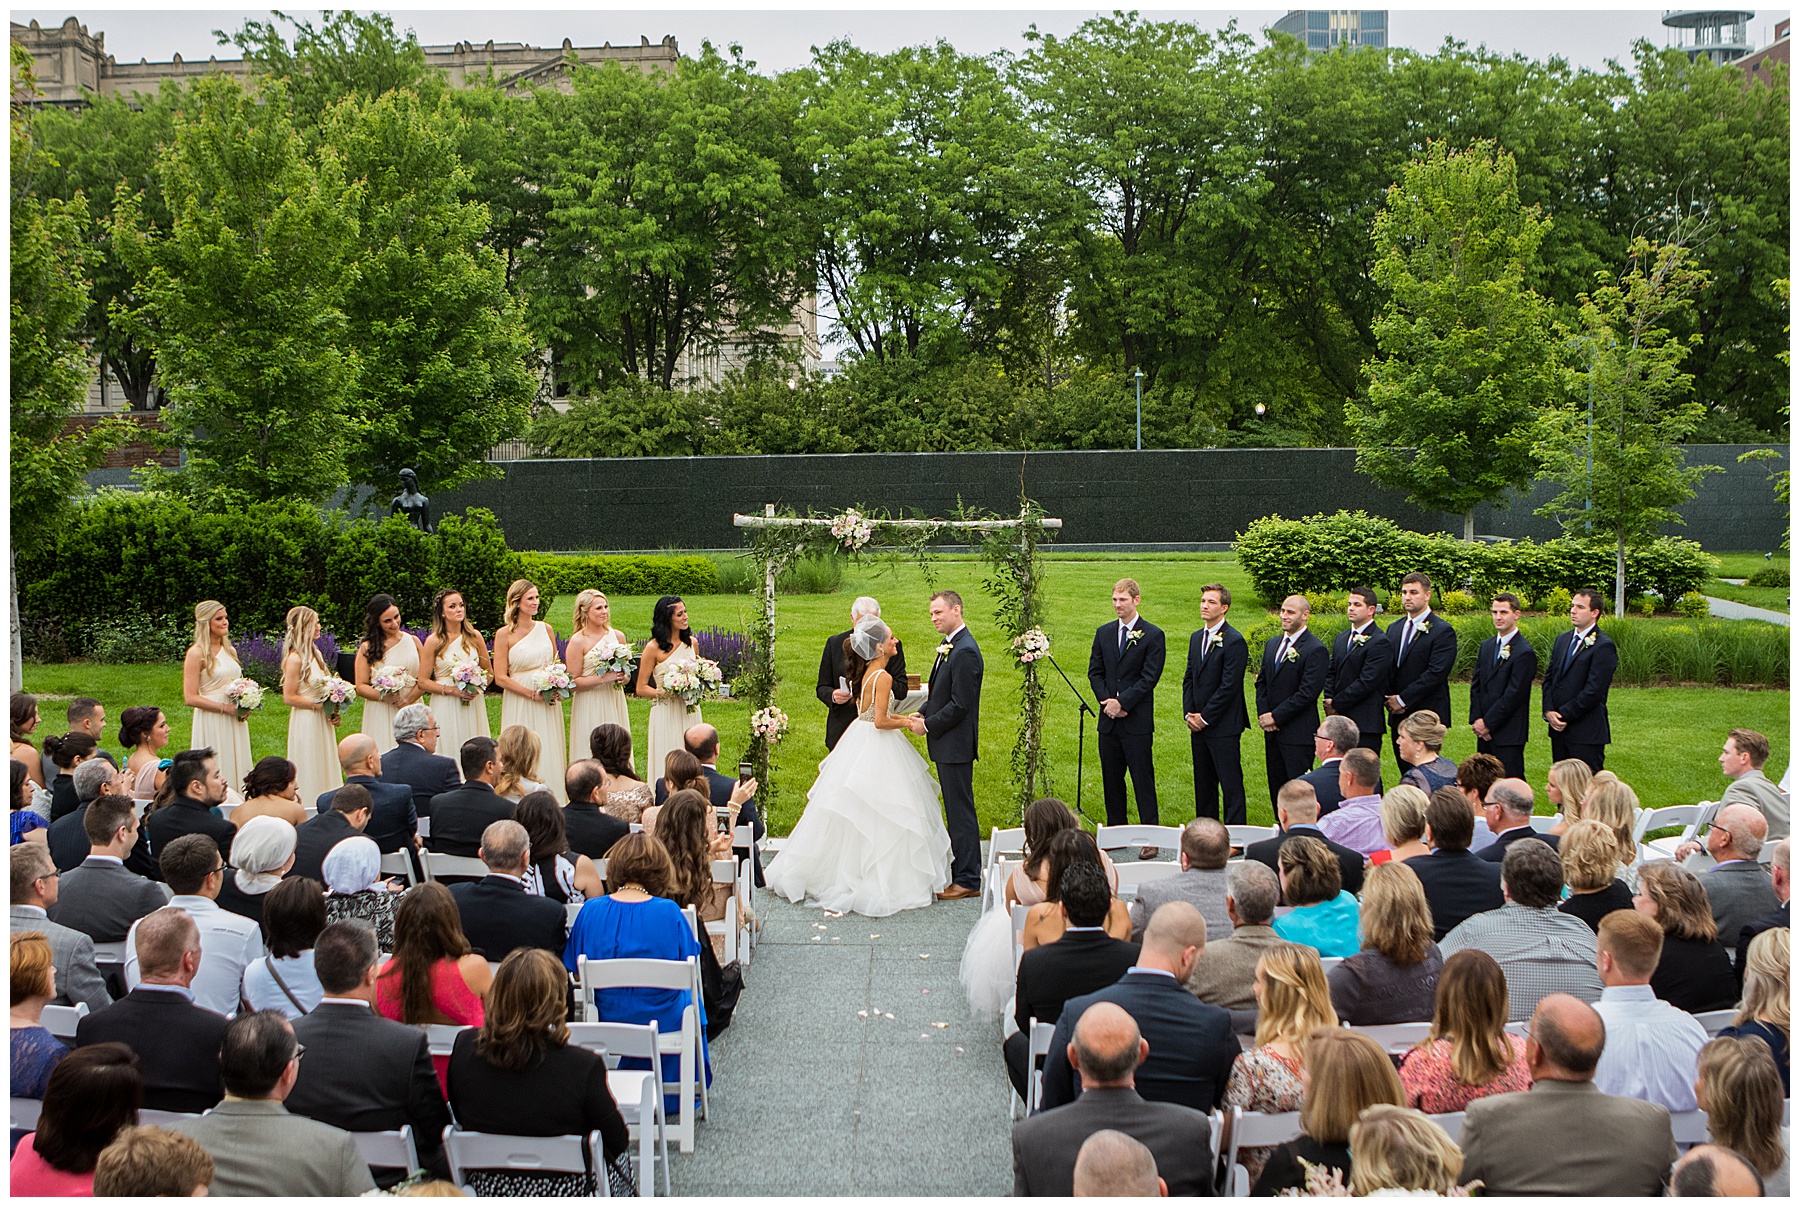 Outdoor wedding at Josyln Art Museum,Andrea Bibeault: a wedding photojournalist specializes in real,photojournalistic wedding photography. Based in Omaha,we travel all over the midwest and country.,